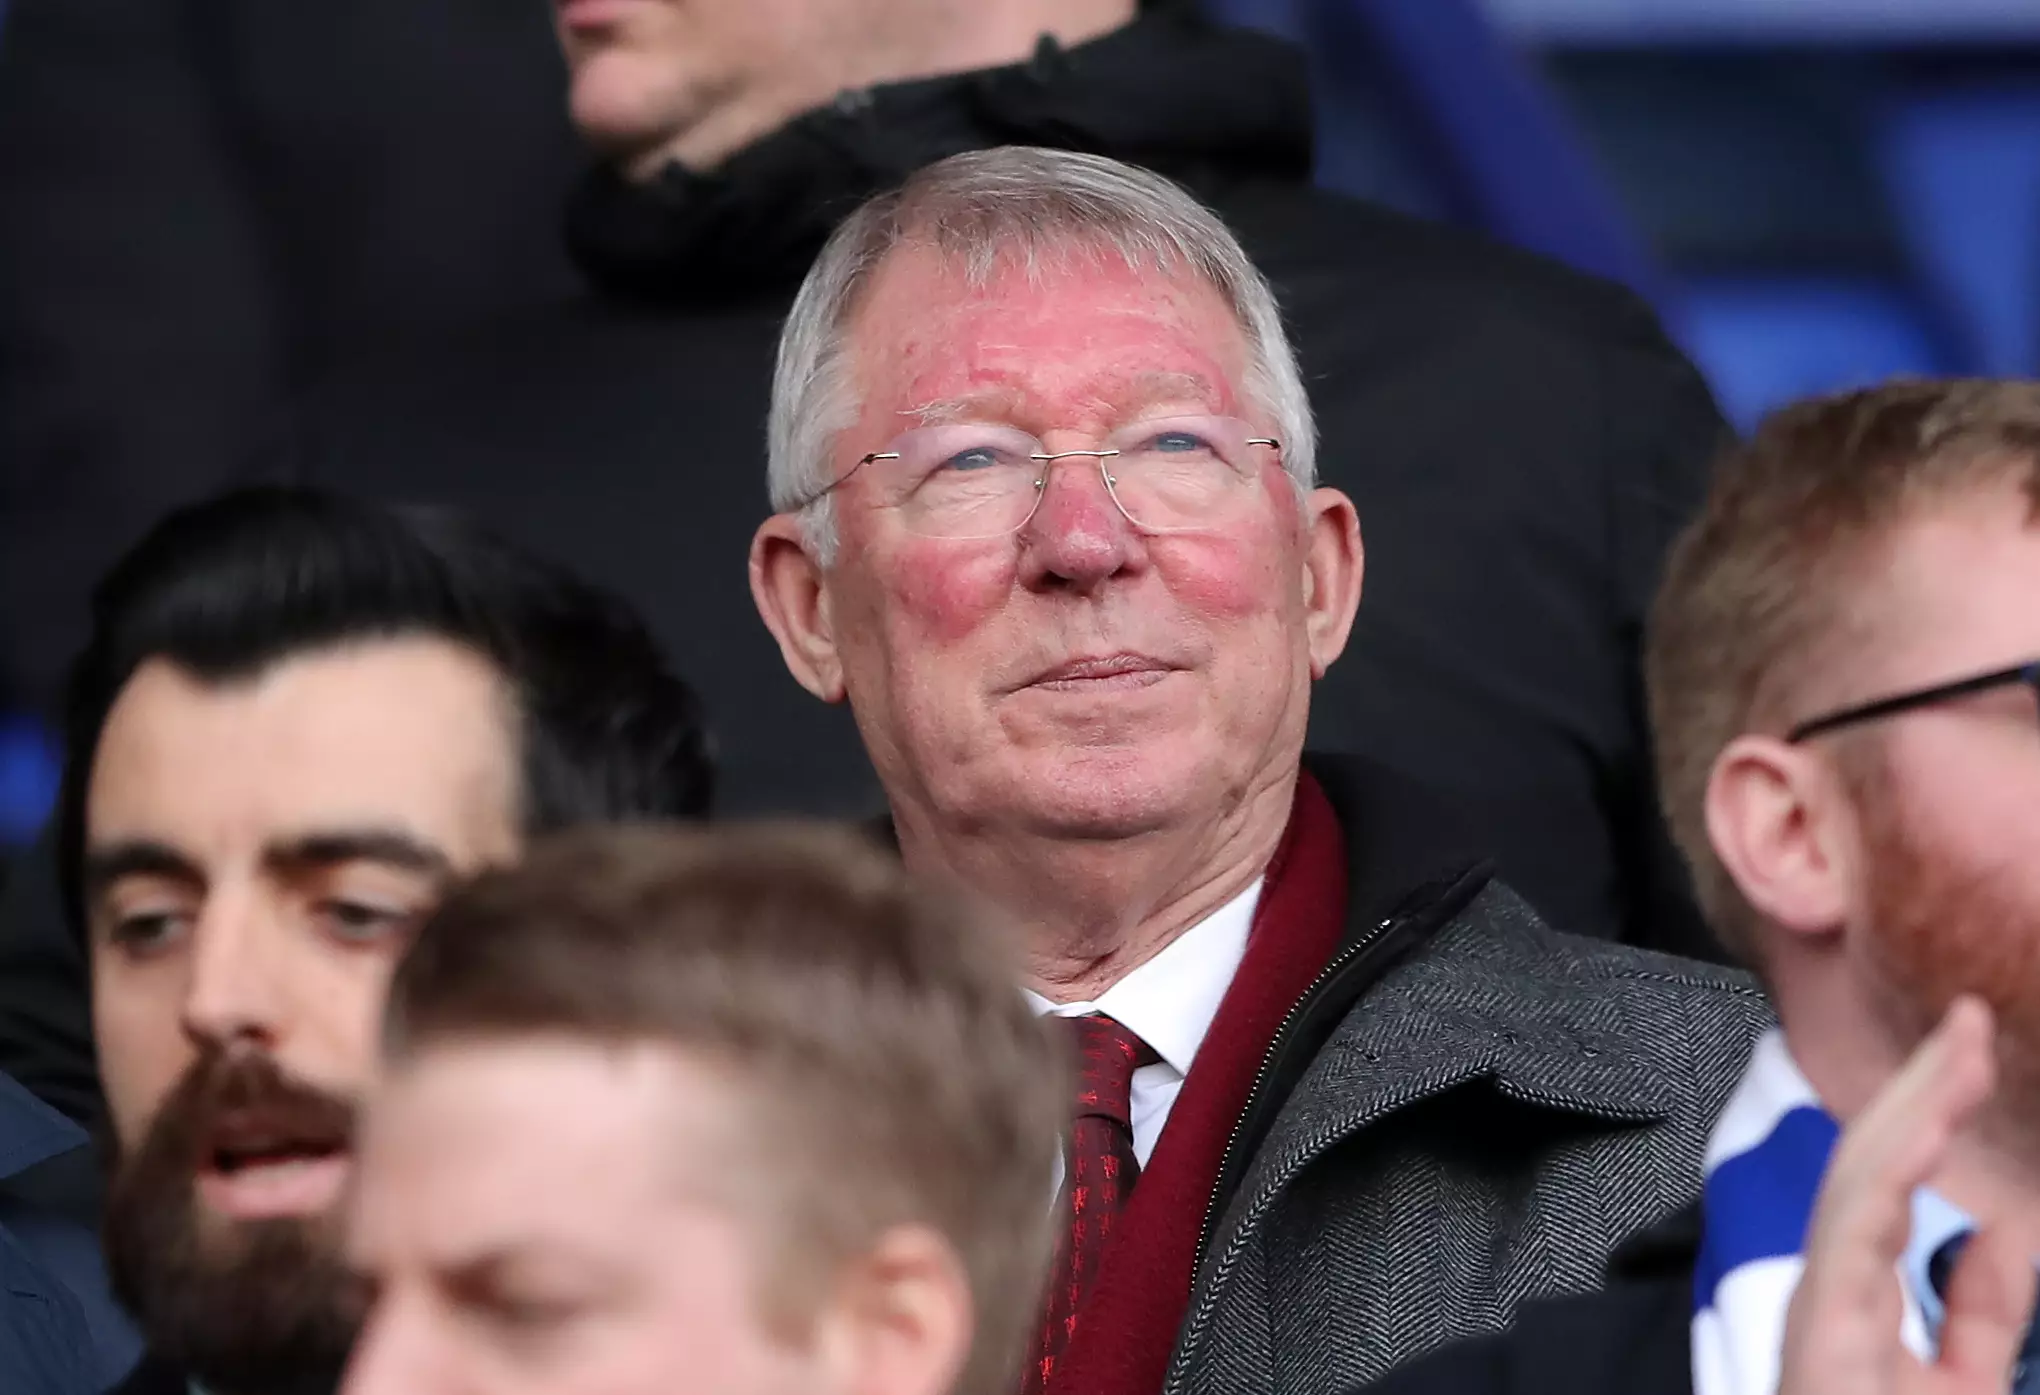 Sir Alex Ferguson spoke highly of the 21-year-old winger in a recent interview